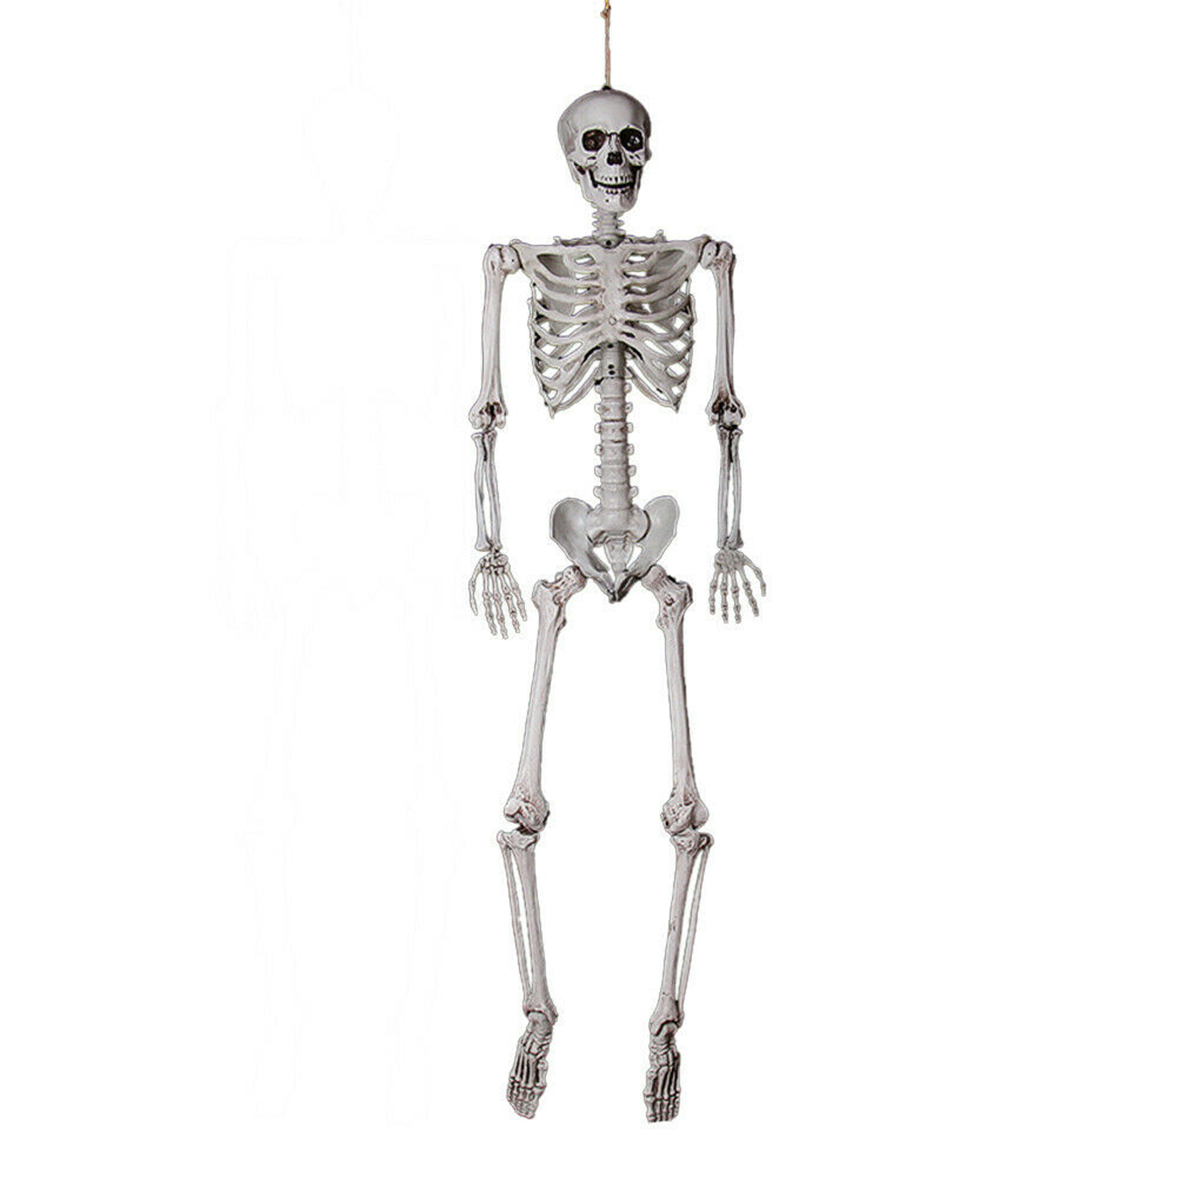 90cm-Human-Skeleton-Scary-Bones-Poseable-Hanging-Halloween-Prop-Party-Decorations-1573645-3